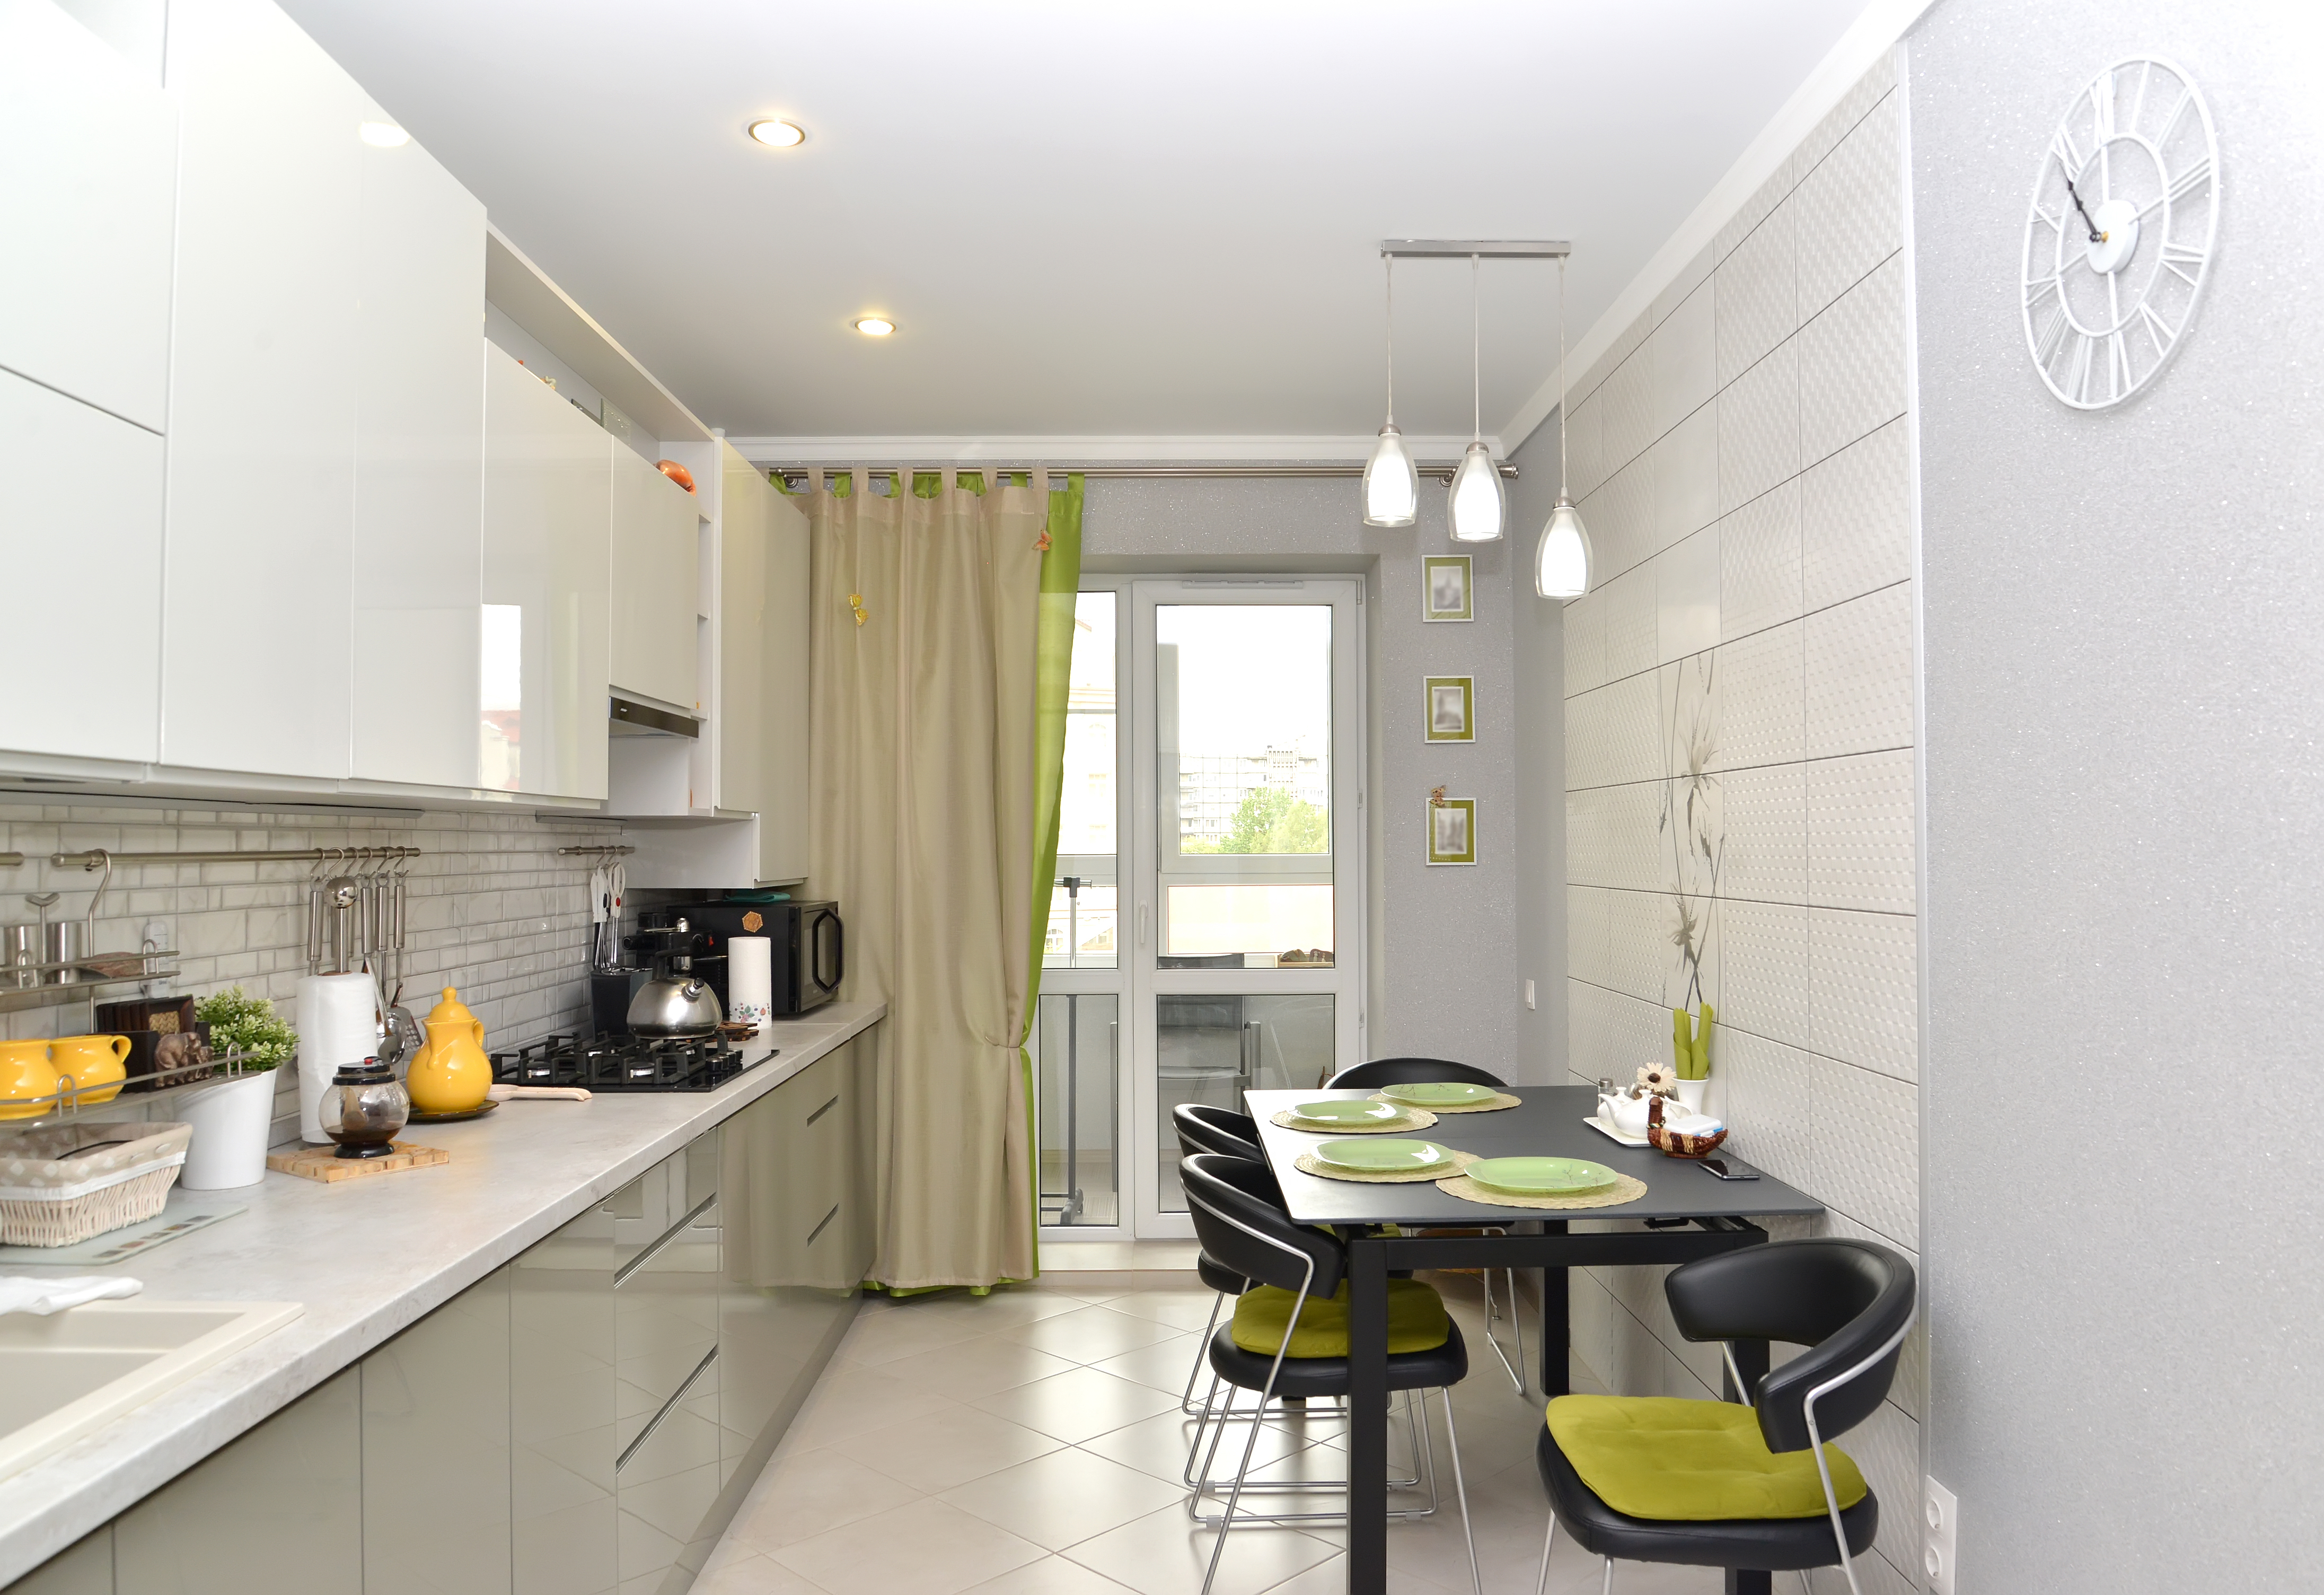 Home interior designers in Bangalore - Simple Kitchen Design Ideas for your Sweet Home